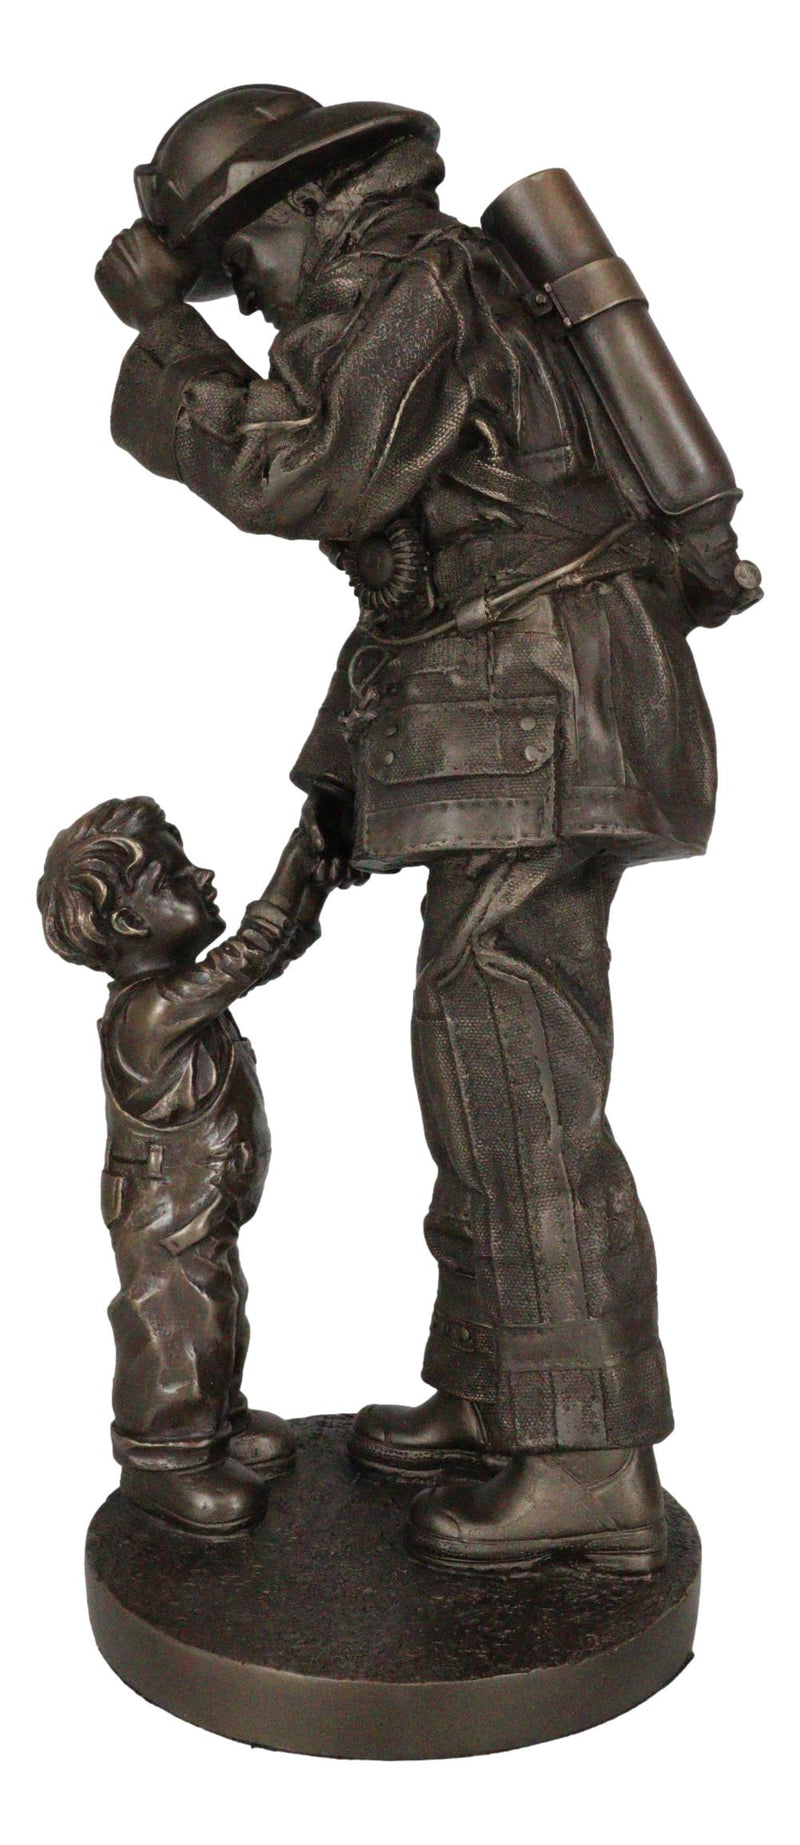 Civil Servant Fire Fighter Large Child Shaking Hands and Thanking Fireman Statue